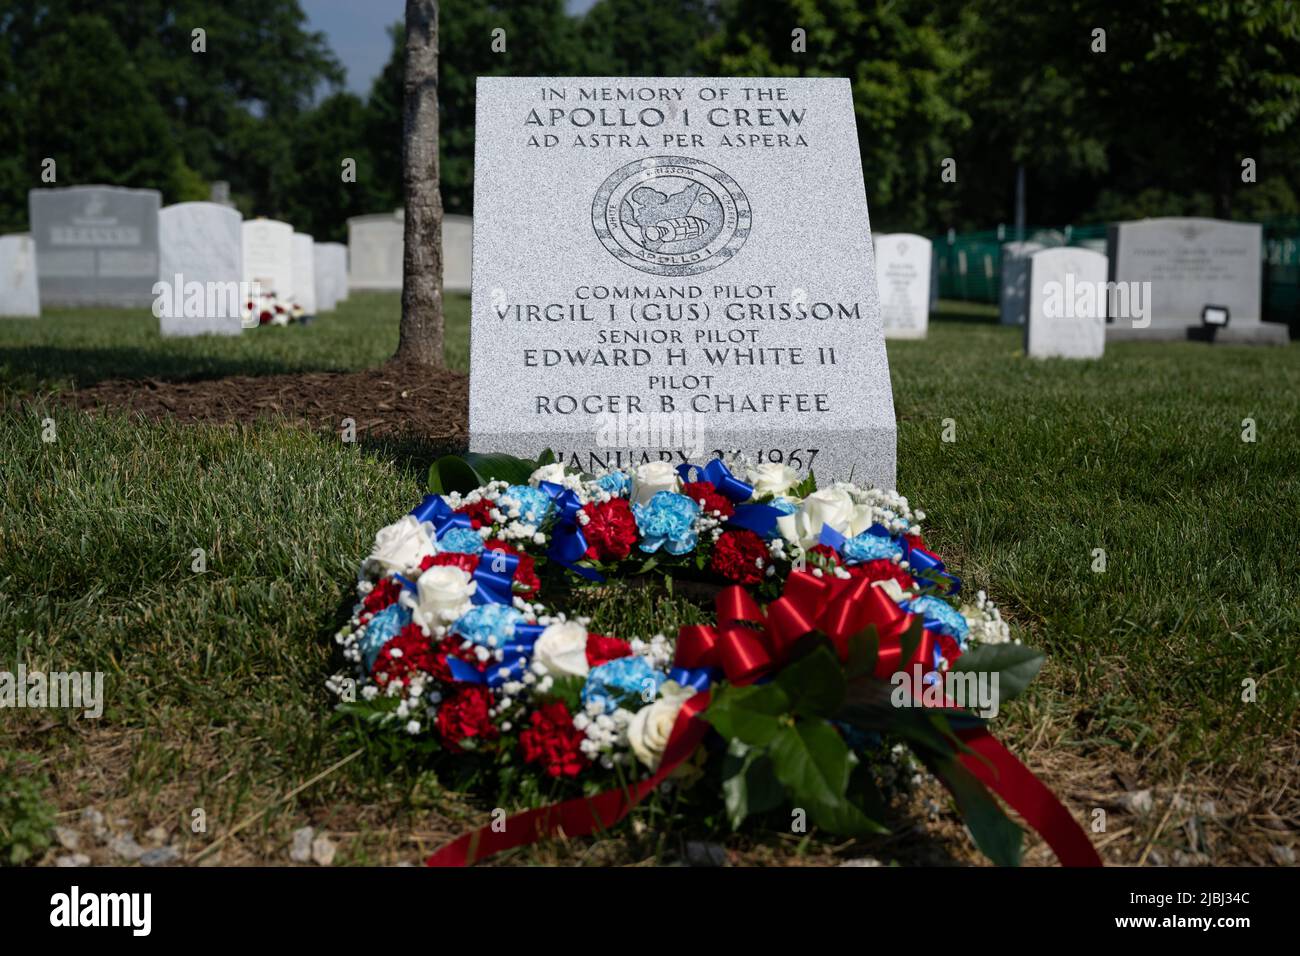 Arlington, Virginia, USA. 2nd June, 2022. The Apollo 1 monument is seen at Arlington National Cemetery, Thursday, June 2, 2022, in Arlington, Va. The monument honors and memorializes the Apollo 1 crew of Virgil I. 'Gus' Grissom, Edward H. White II, and Roger B. Chaffee. Credit: Bill Ingalls/NASA/ZUMA Press Wire Service/ZUMAPRESS.com/Alamy Live News Stock Photo